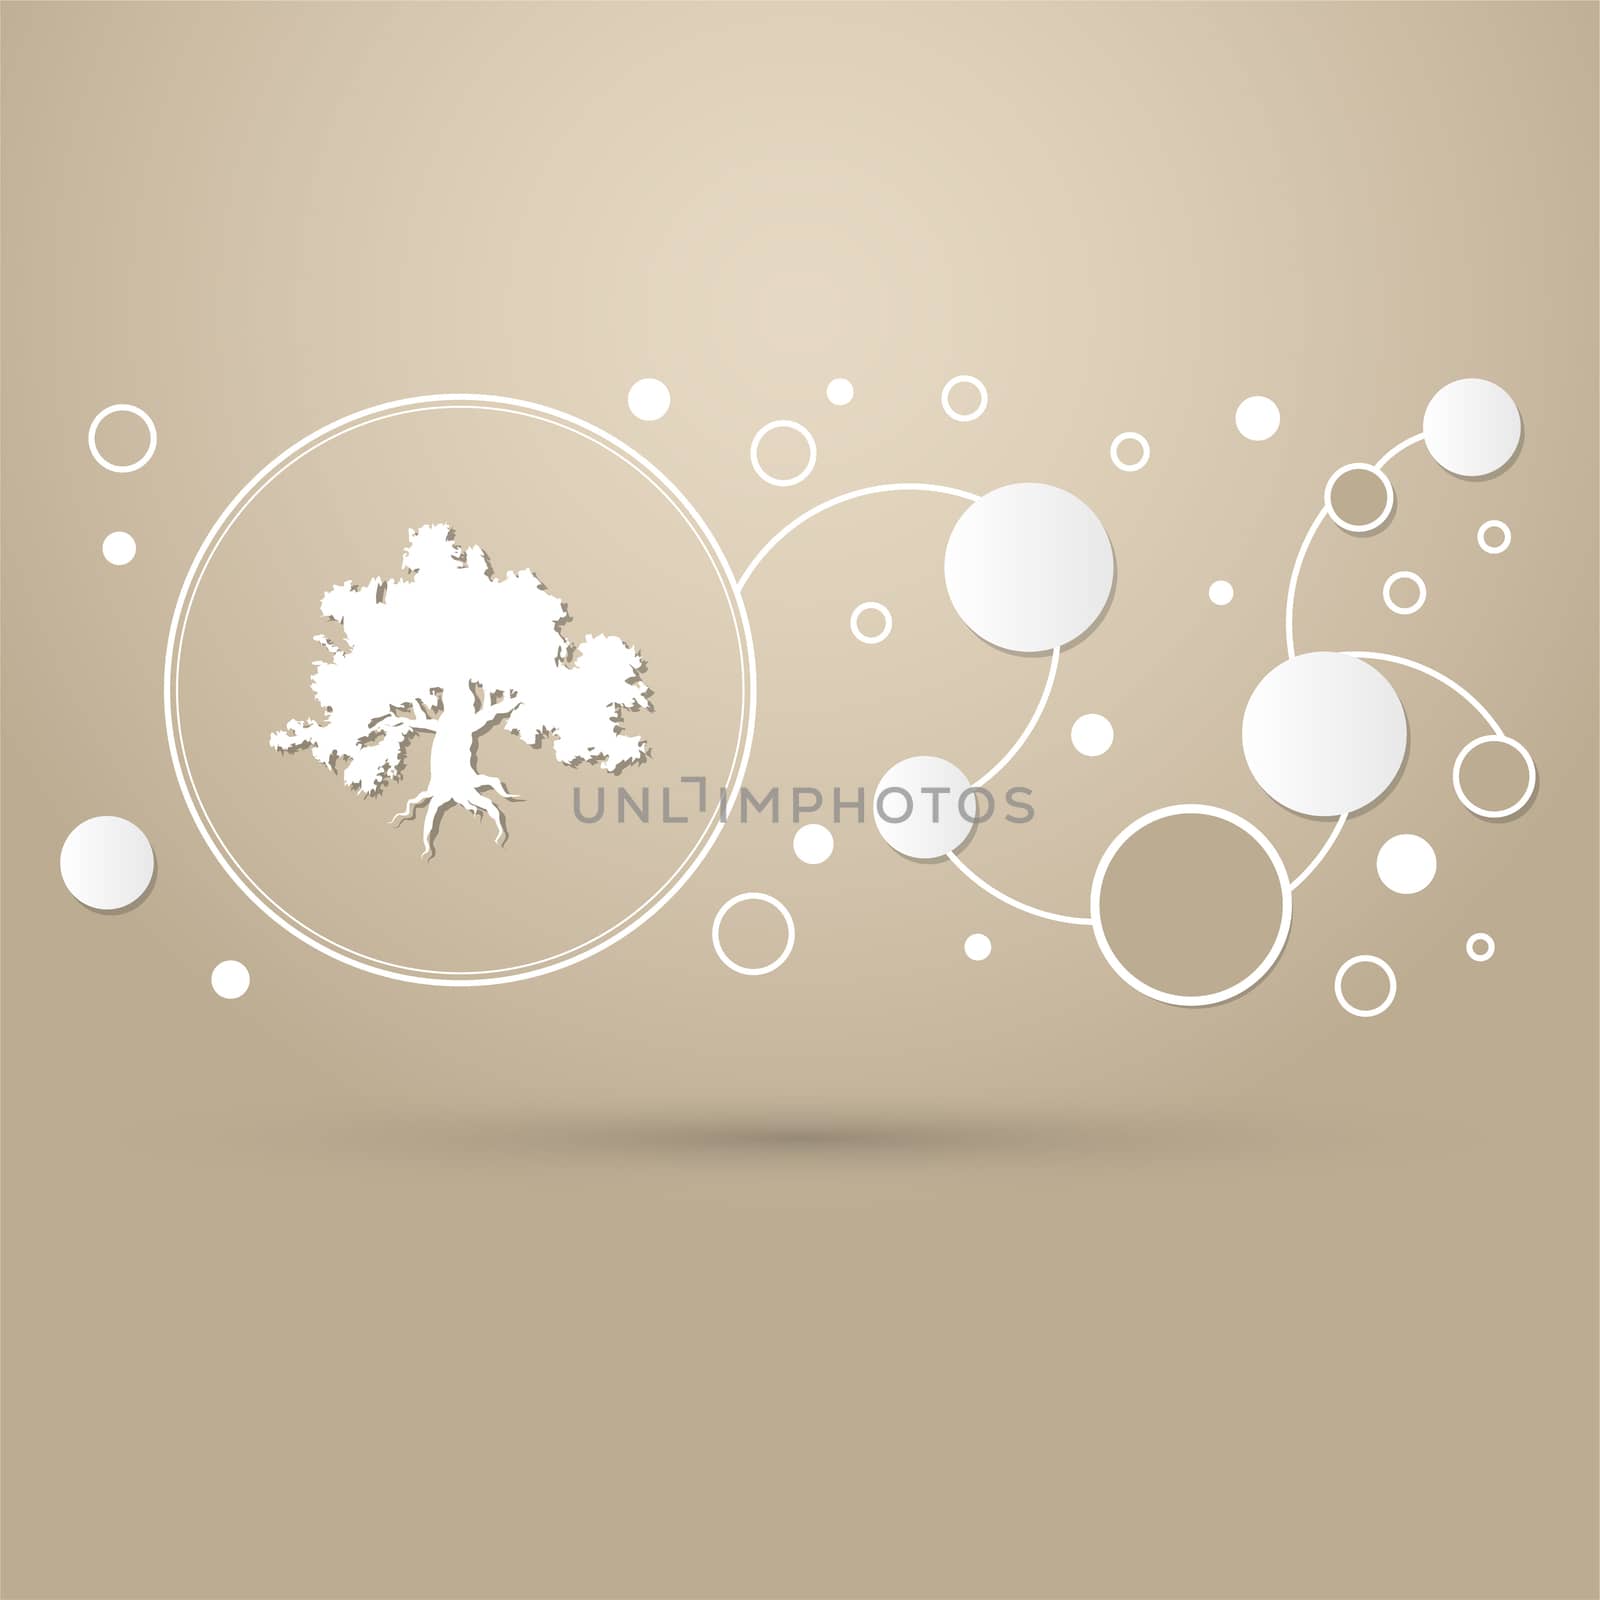 Decorative green simple tree icon on a brown background with elegant style and modern design infographic. illustration